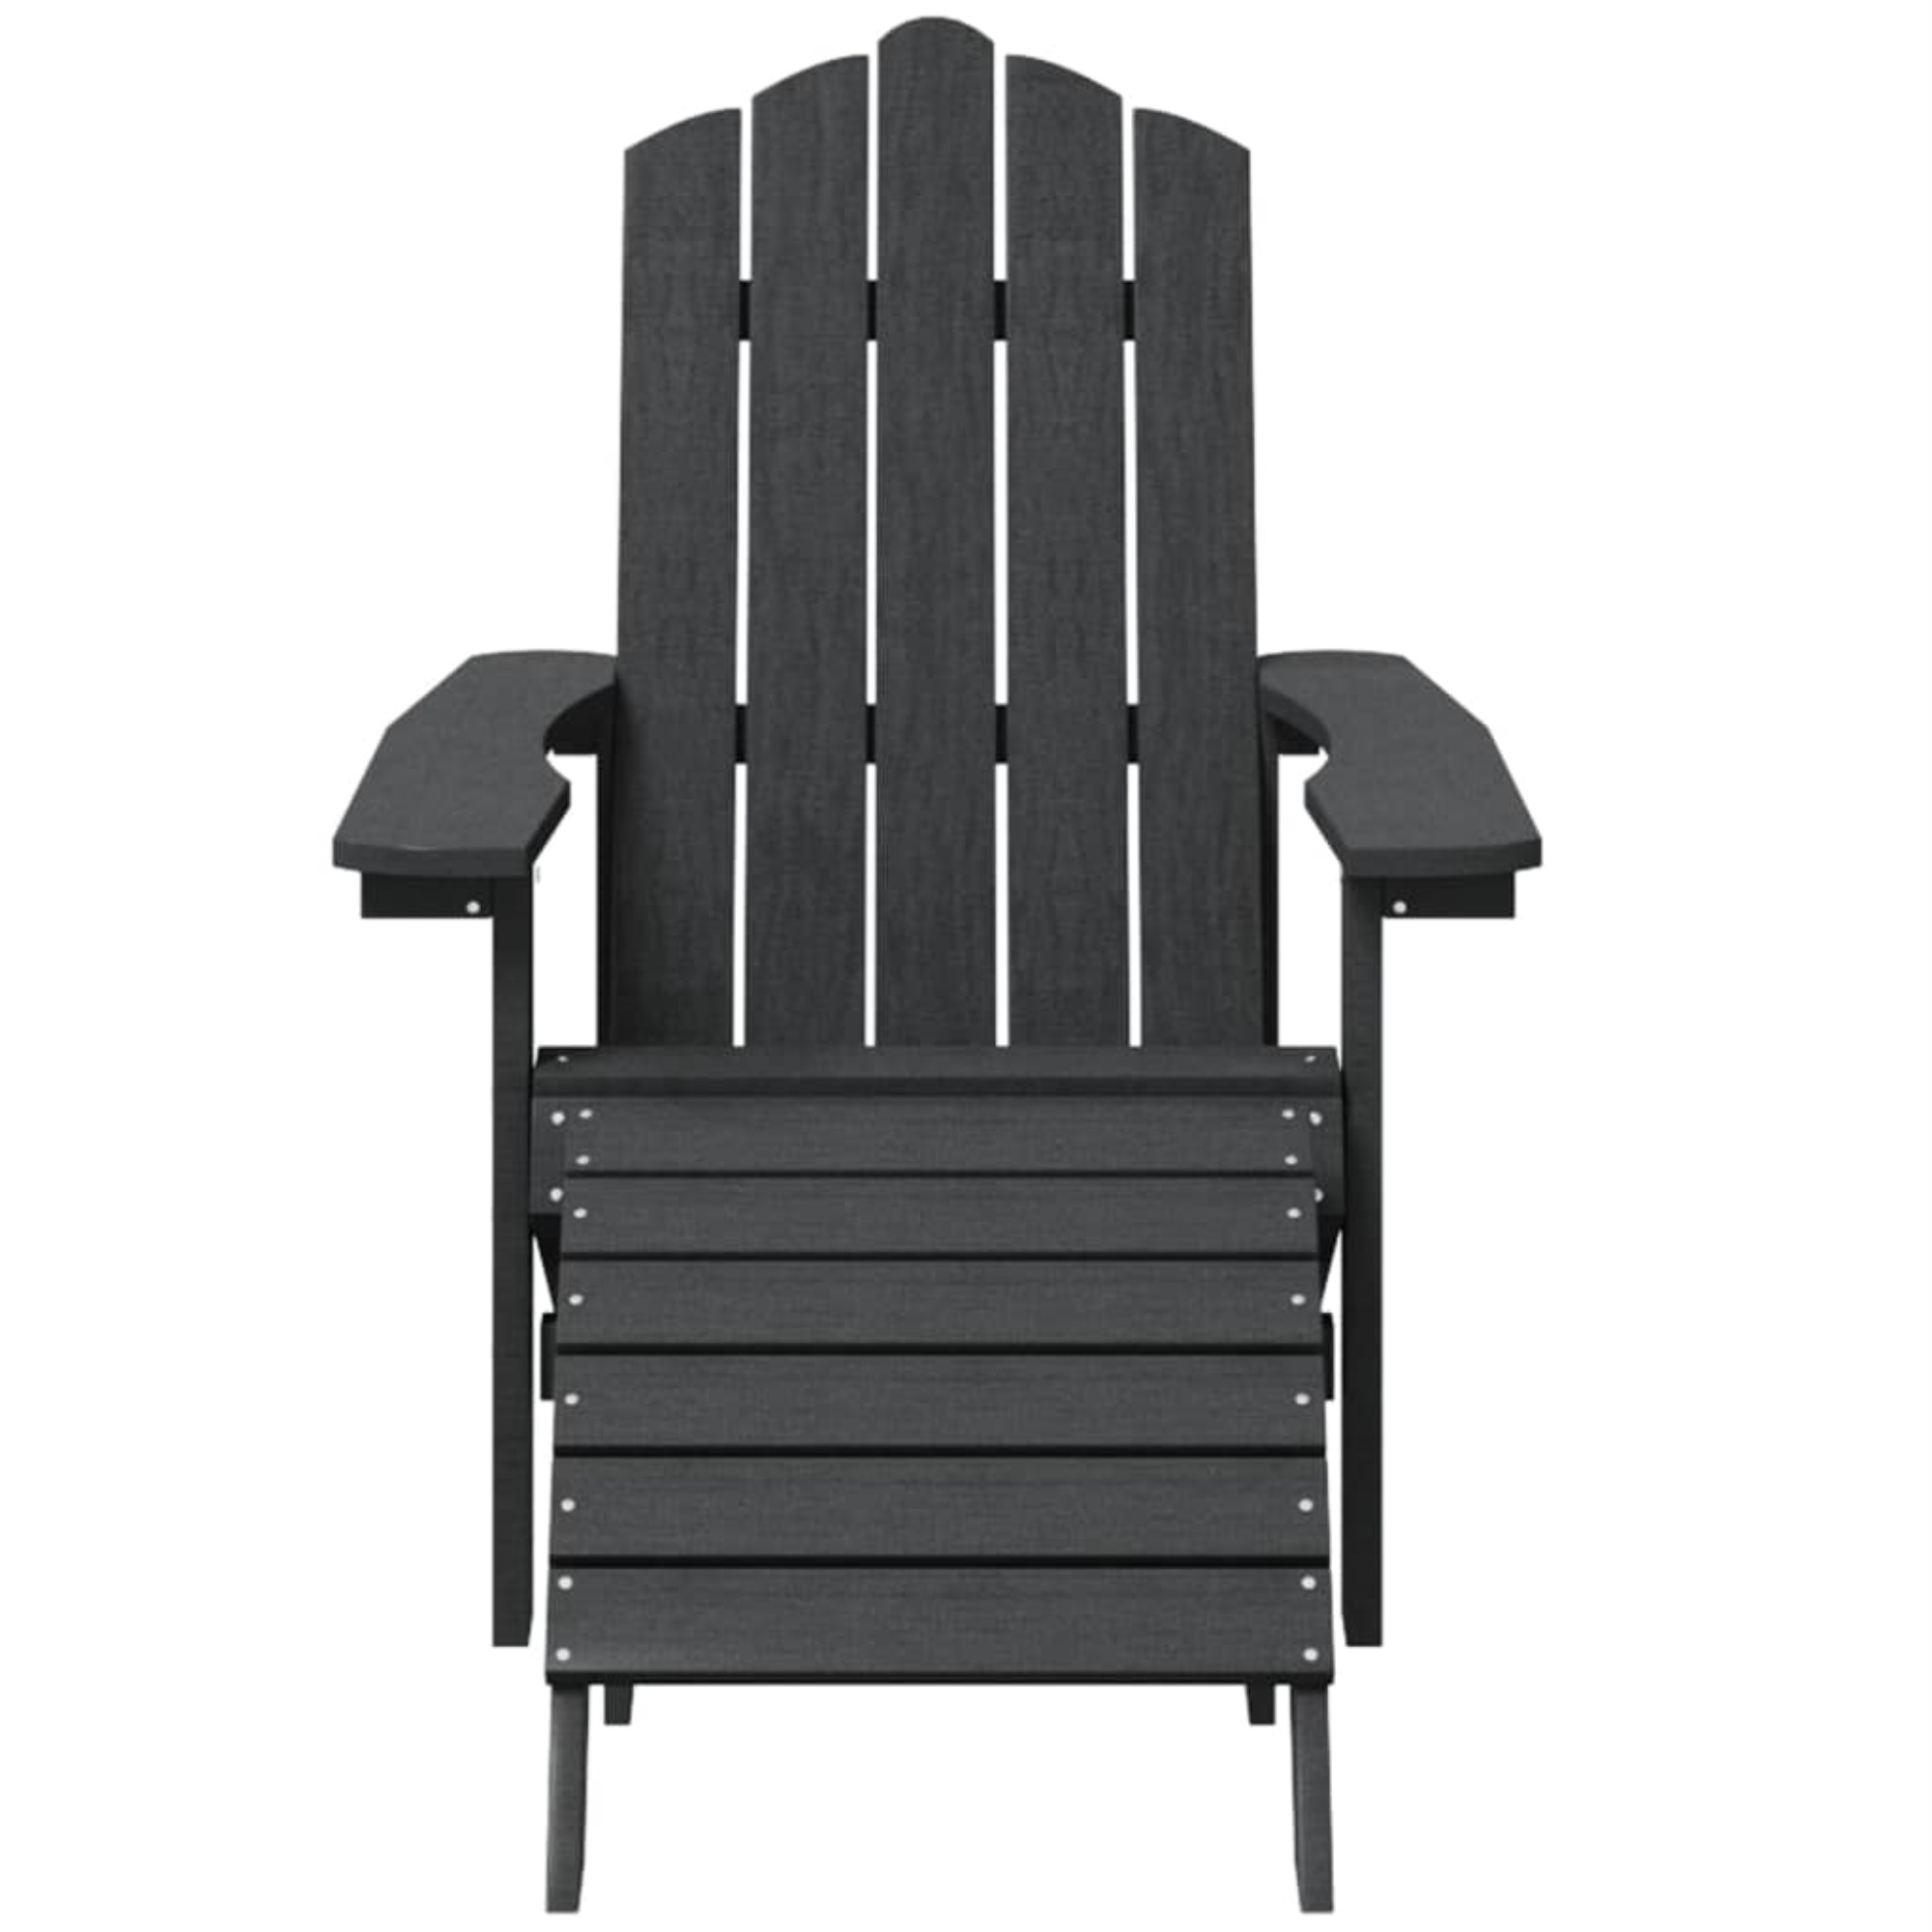 vidaXL Patio Adirondack Chairs 2 pcs with Footstools HDPE Anthracite Anthracite